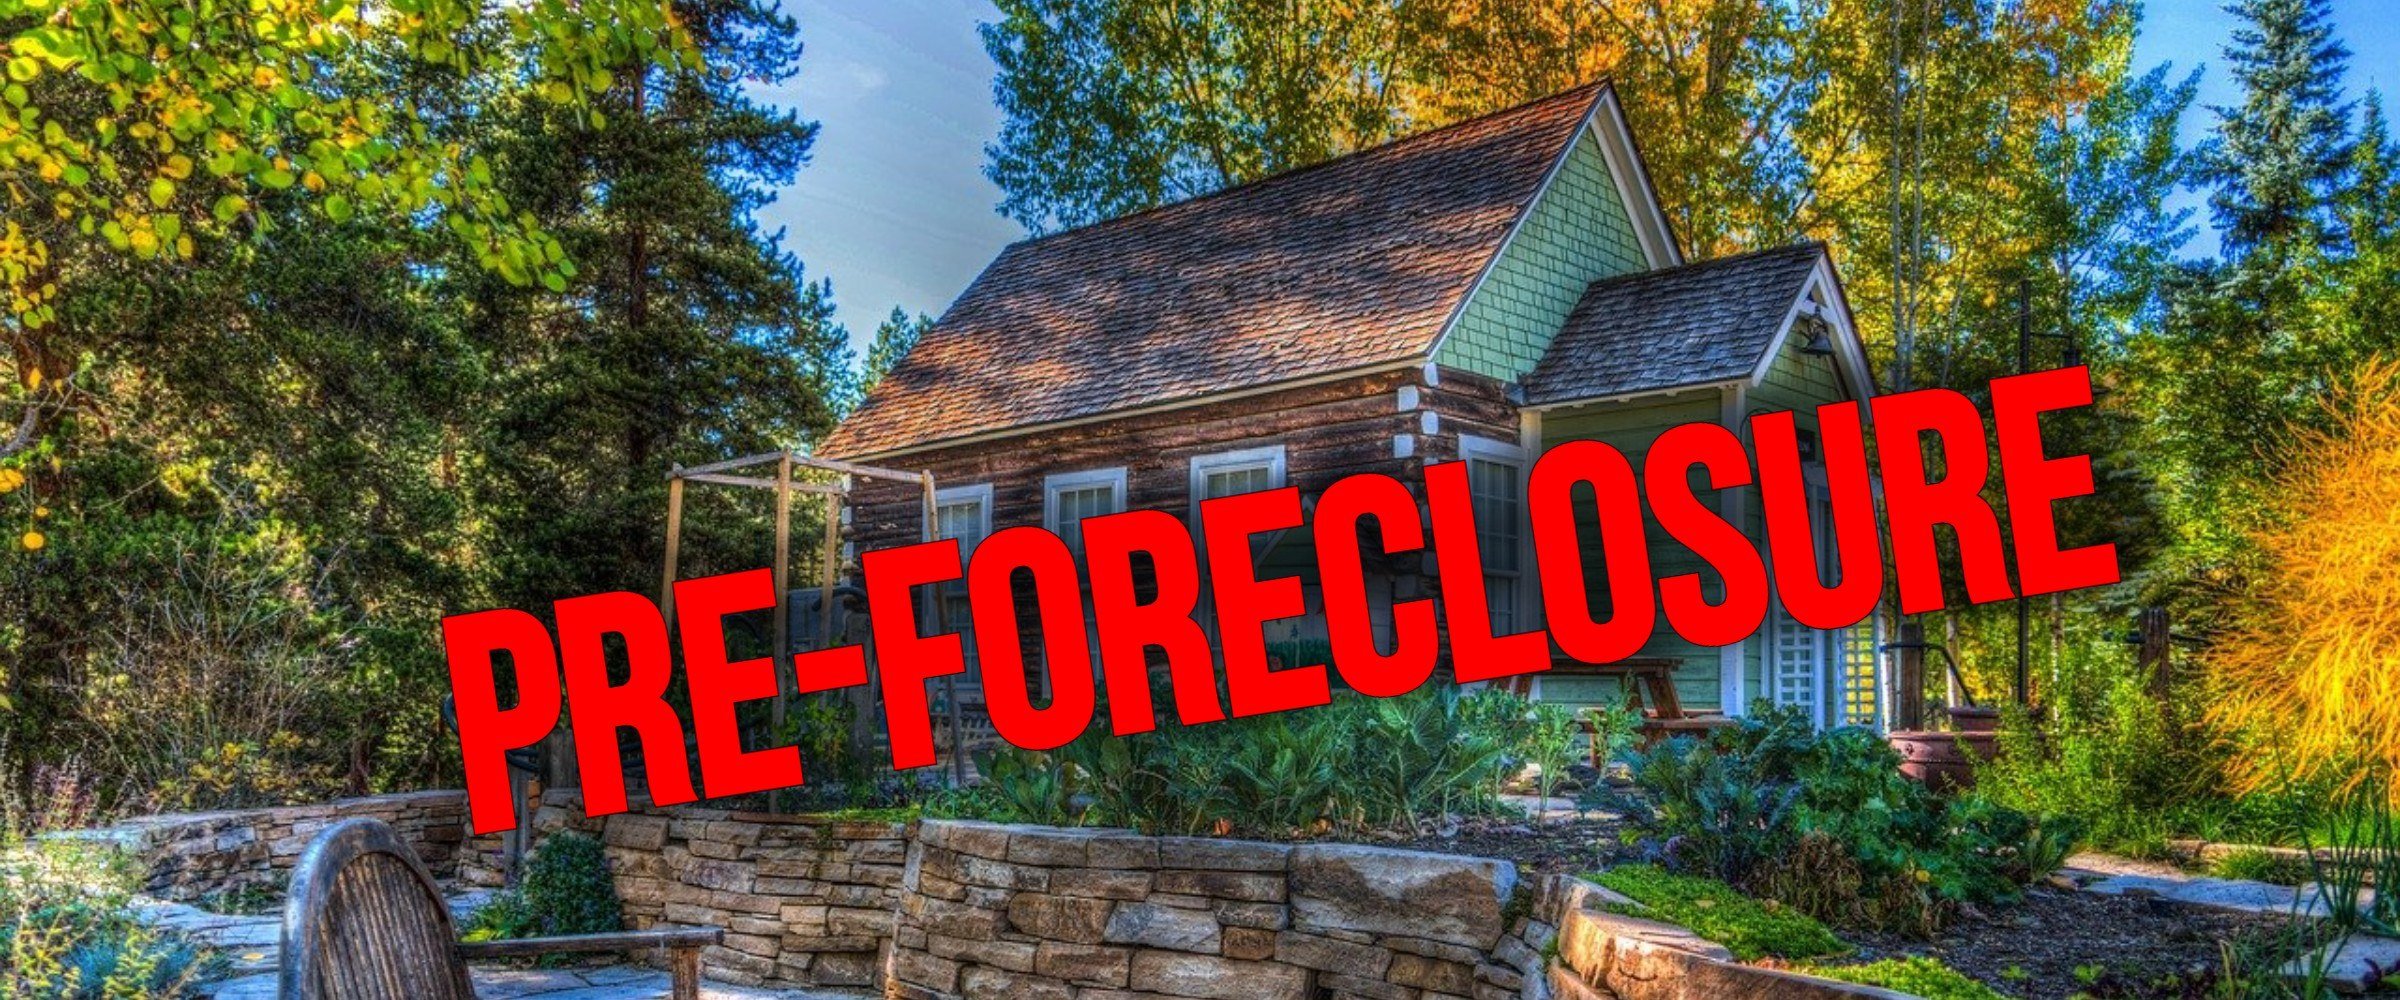 zillow home listed in preforeclosure 